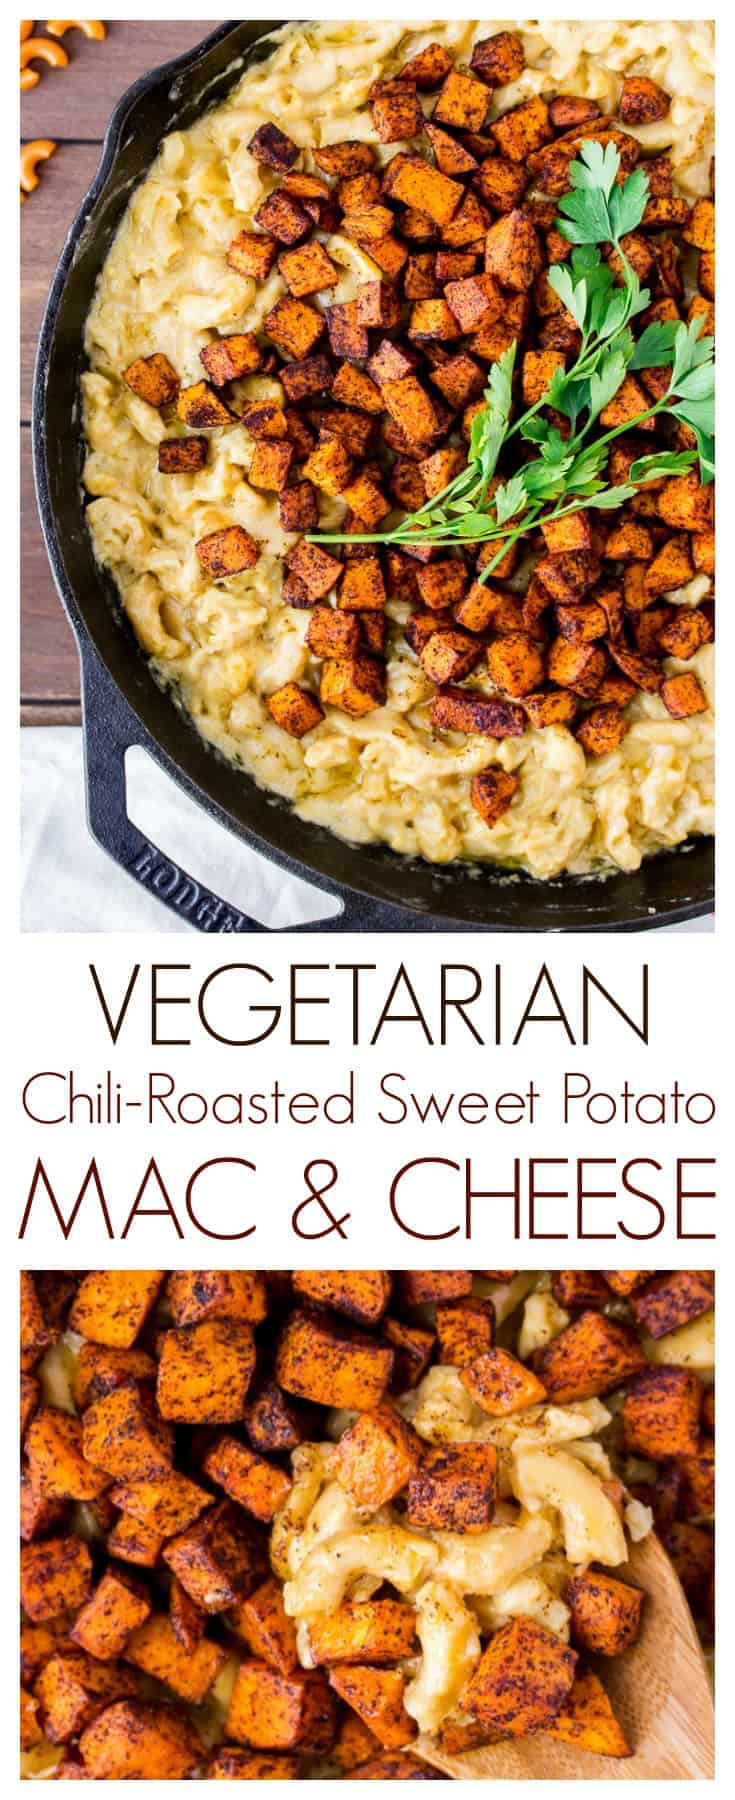 This vegetarian Chili-Roasted Sweet Potato Mac and Cheese recipe is warm and hearty. It's a unique comfort food recipe that combines cheesy, spicy, and sweet all in one delicious meal! | #ad #dlbrecipes #vegetarian #sweetpotato #macandcheese